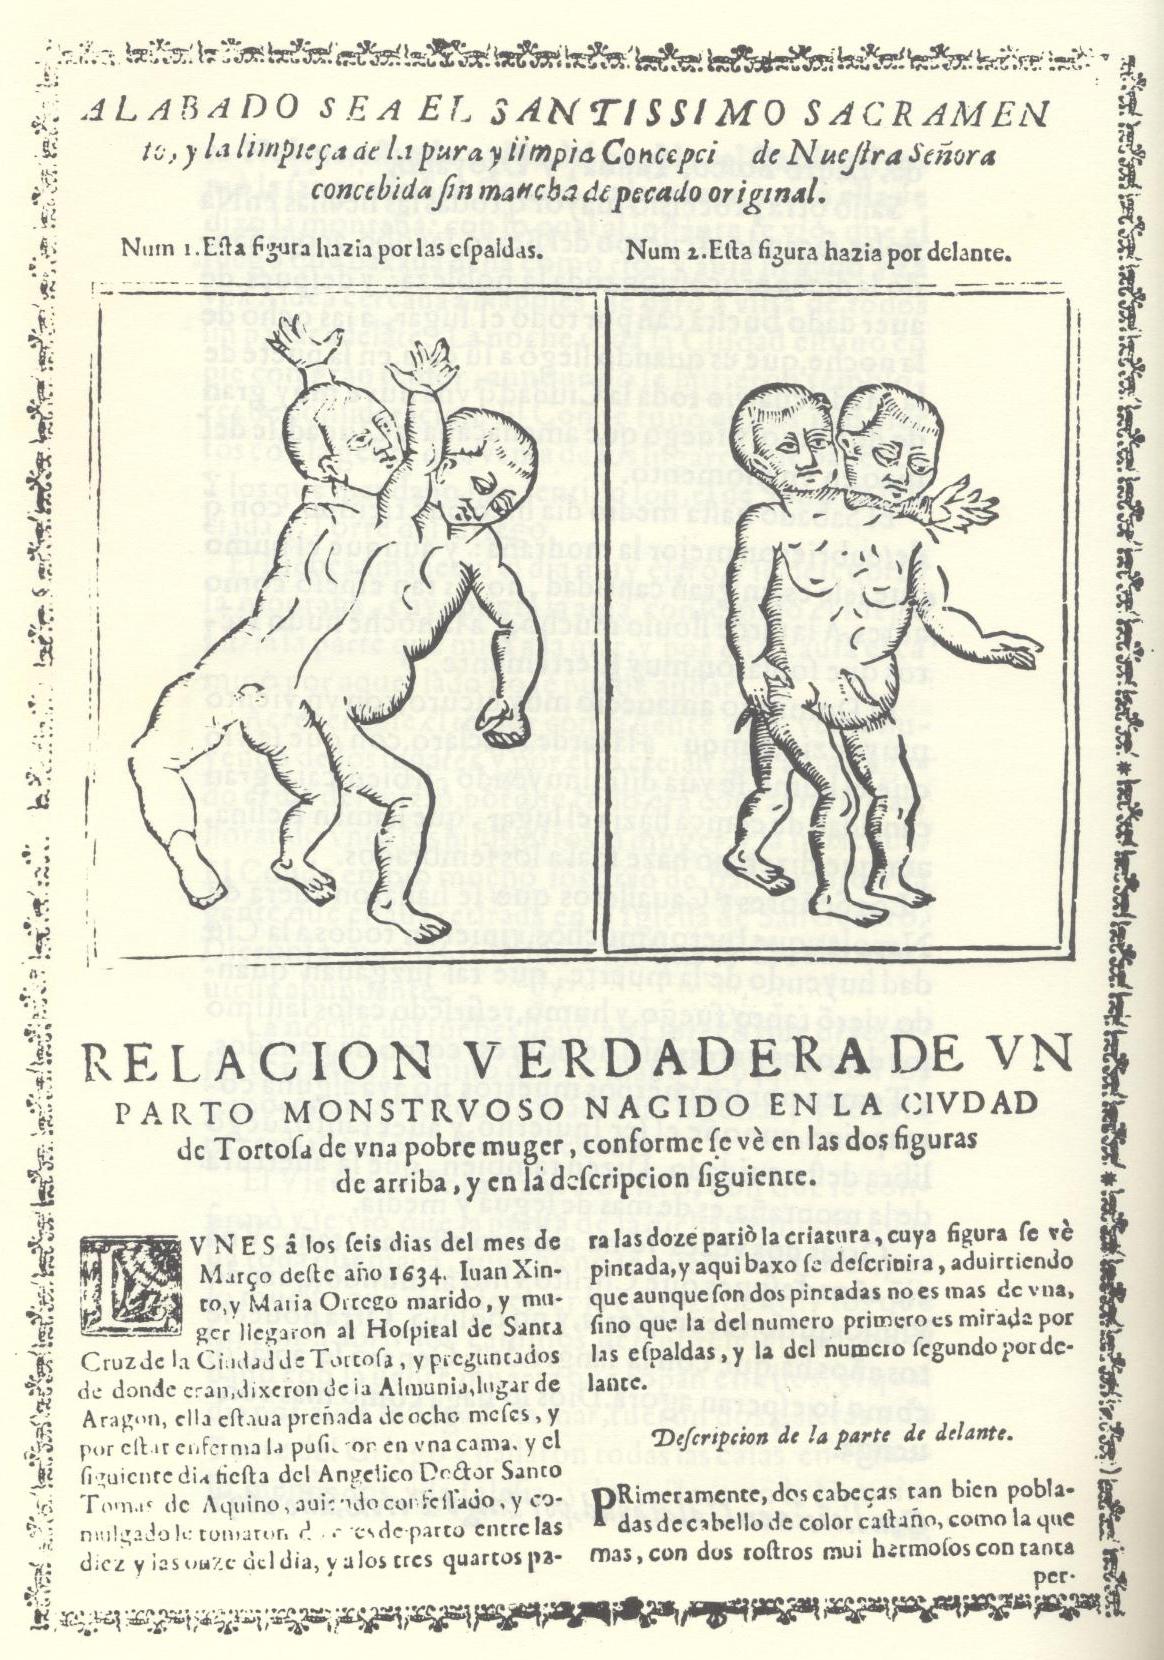 17th-century tabloid about a "monstrous birth" of conjoined twins. This is an example of tabloids that were written about inexplicable moments in life. Photo provided by Hilaire Kallendorf.